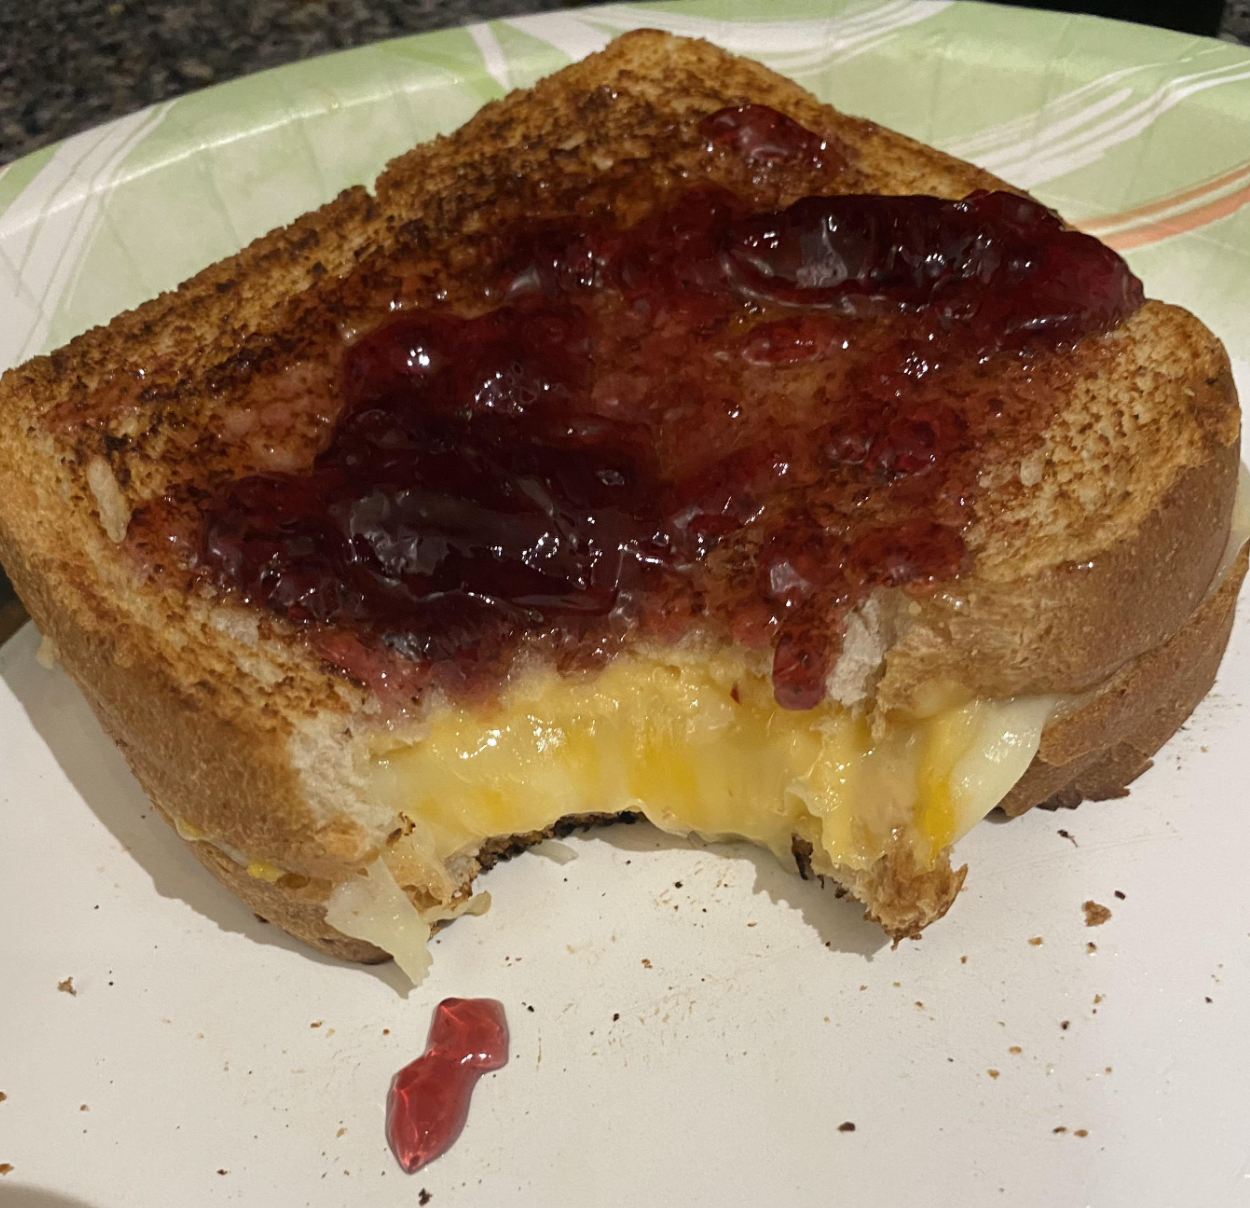 Grilled cheese with grape jelly.